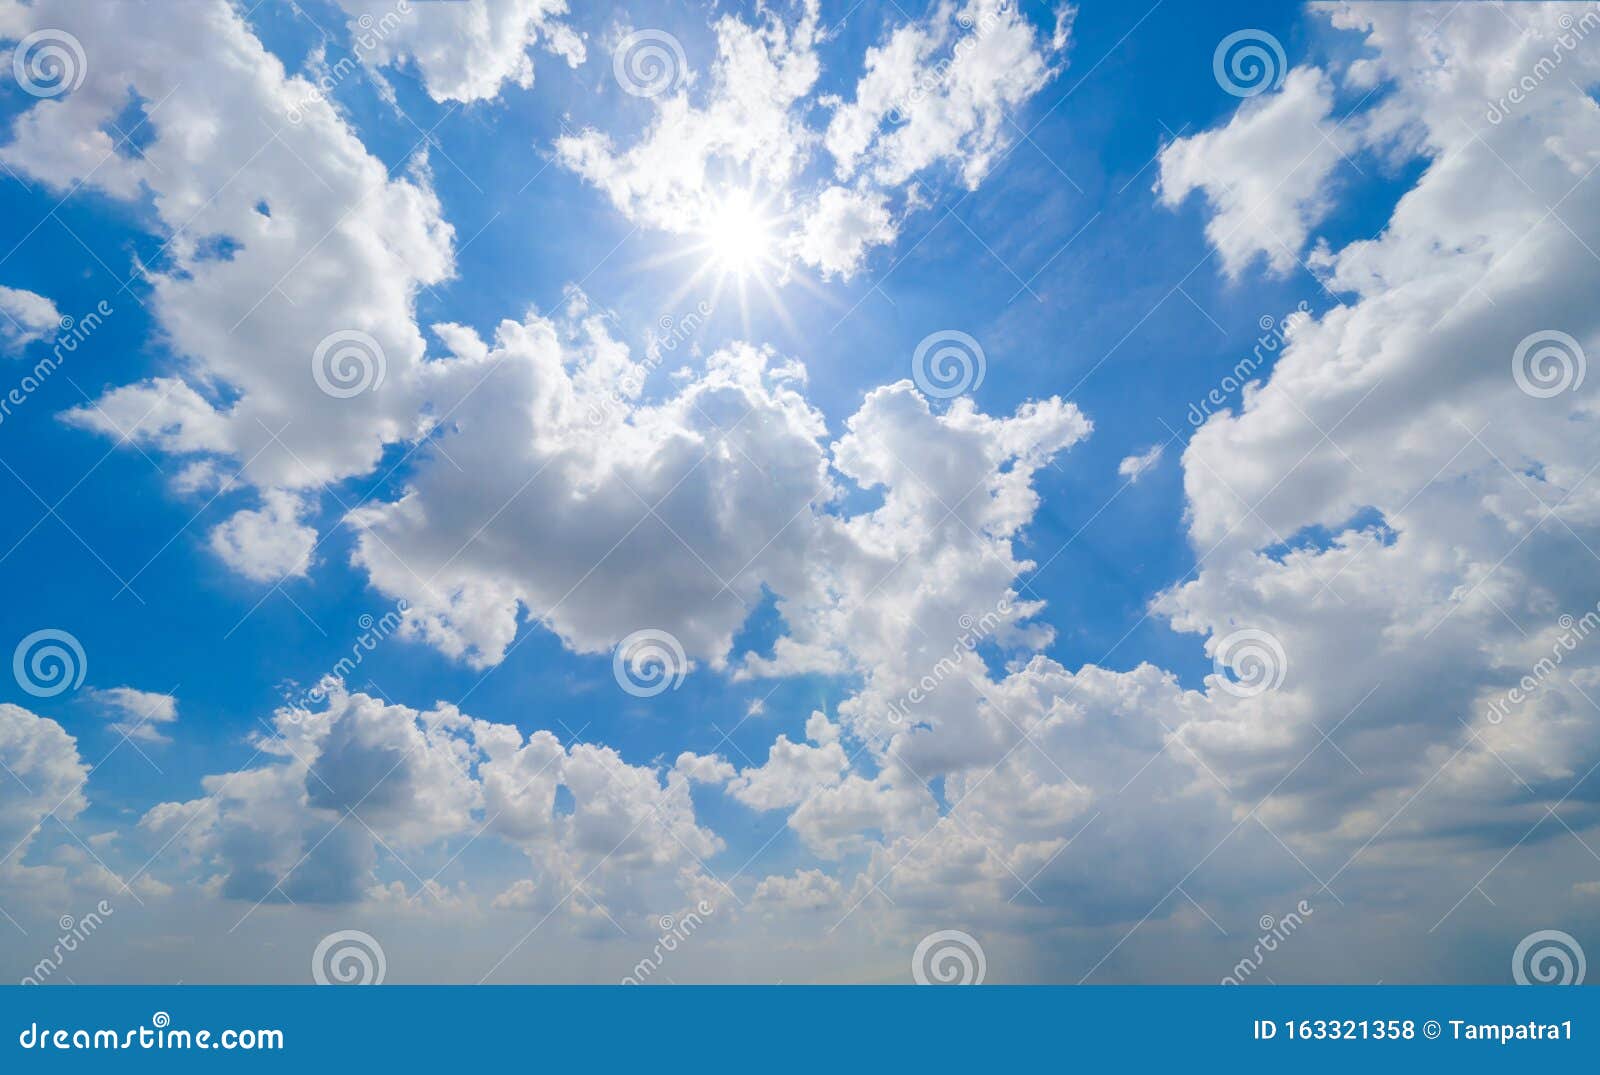 Clear Blue Sky with White Fluffy Clouds in Summer Season at Noon Time.  Abstract Nature Background Stock Photo - Image of white, weather: 163321358